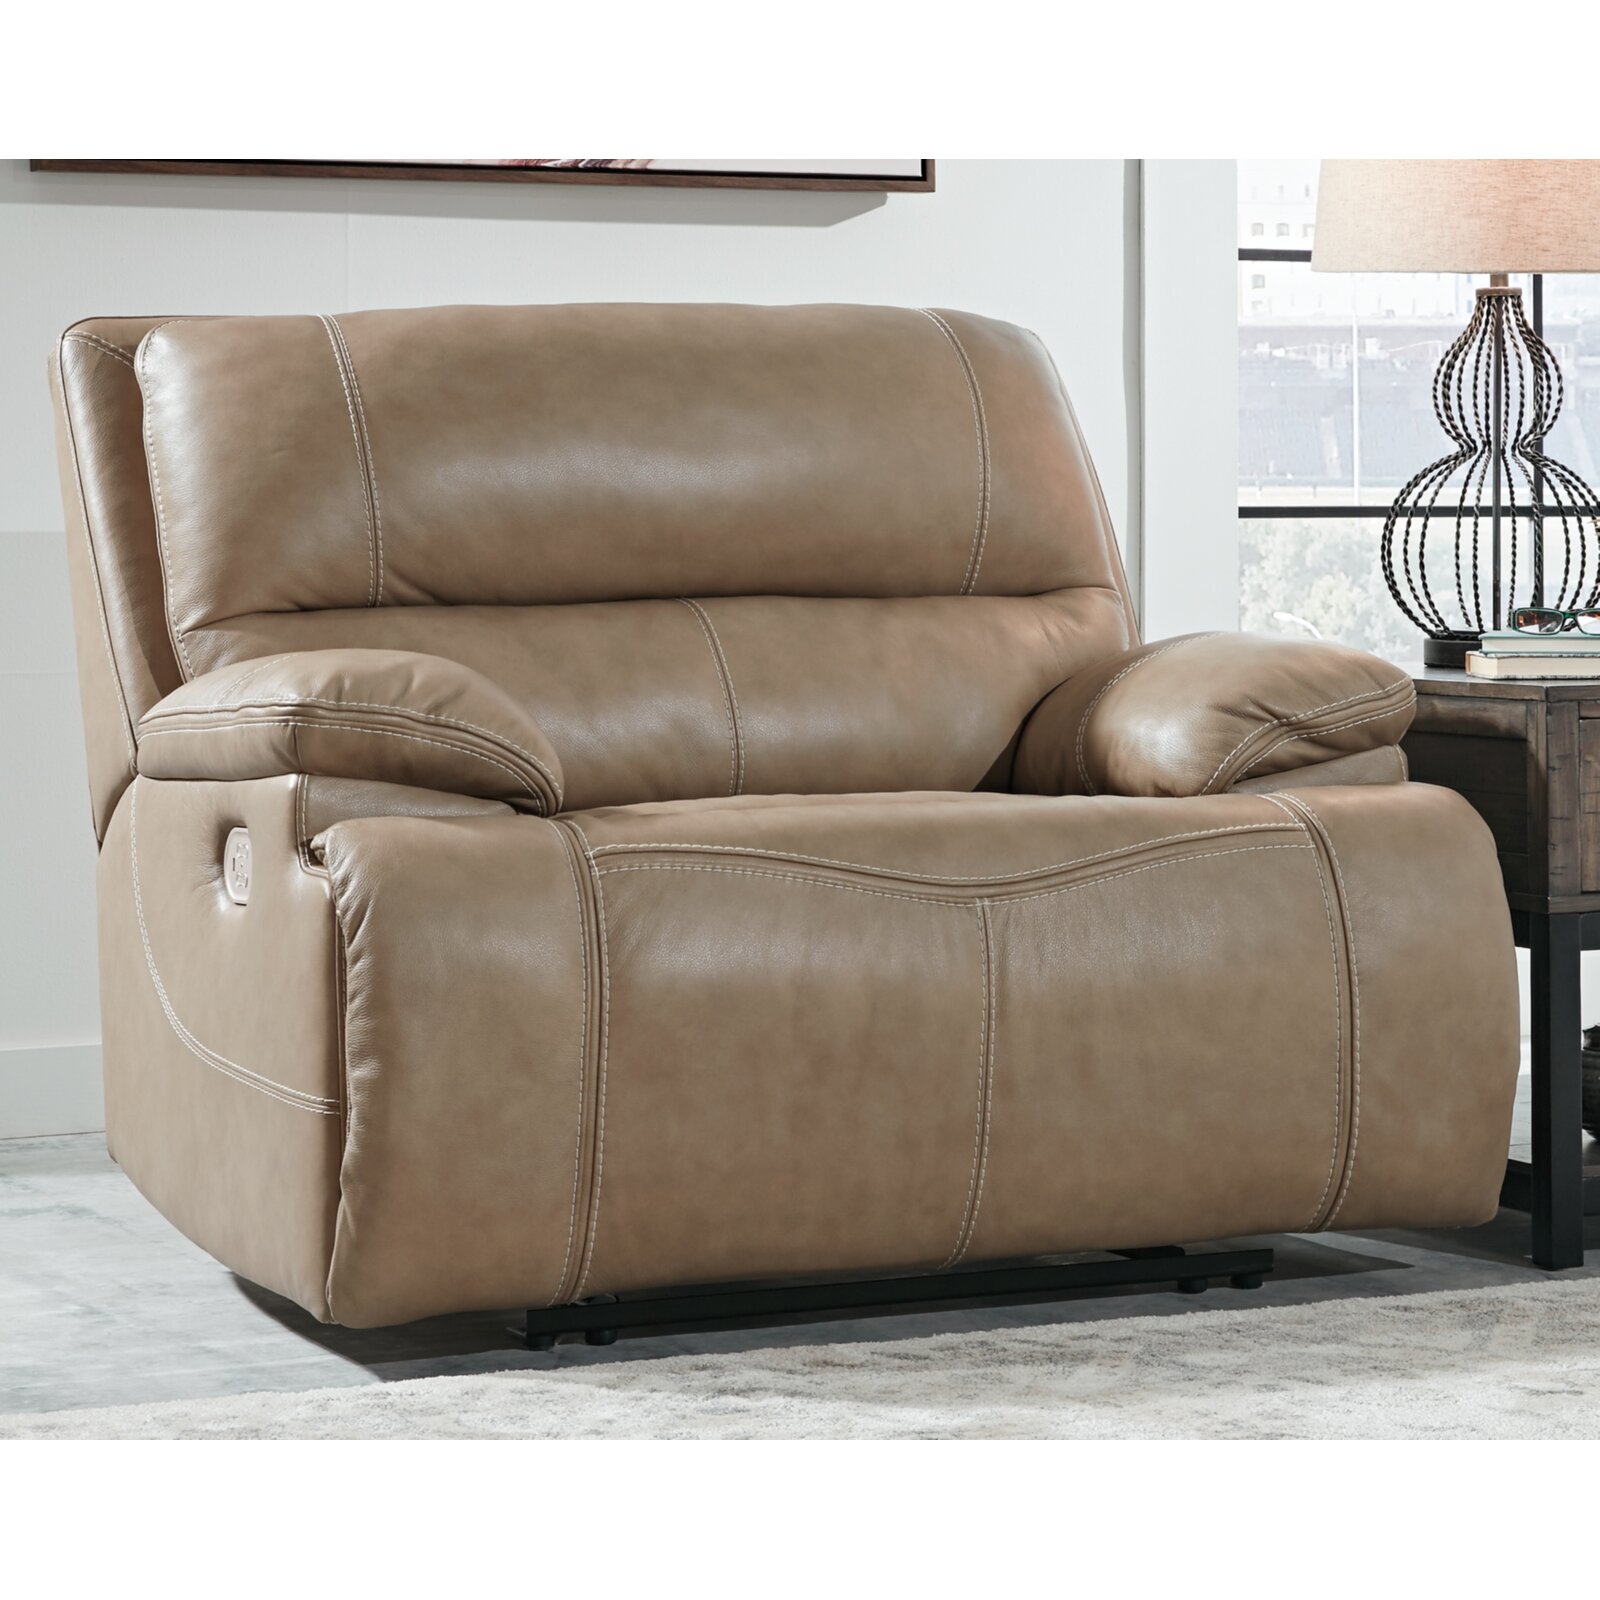 Ophelia & Co. Alvey Leather Recliner & Reviews